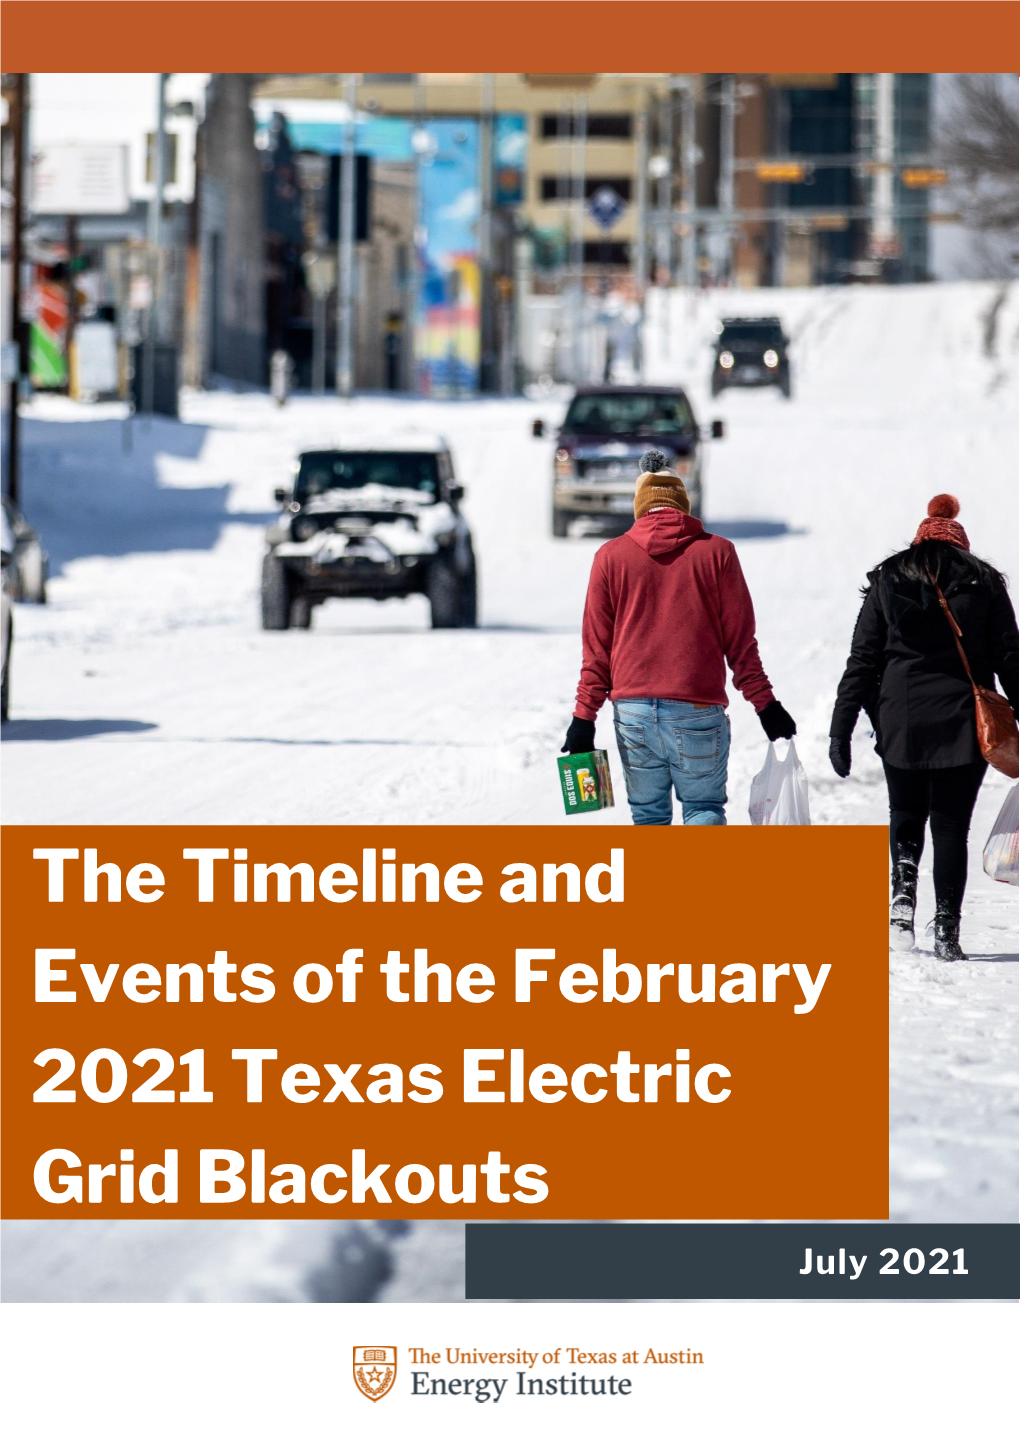 The Timeline and Events of the February 2021 Texas Electric Grid